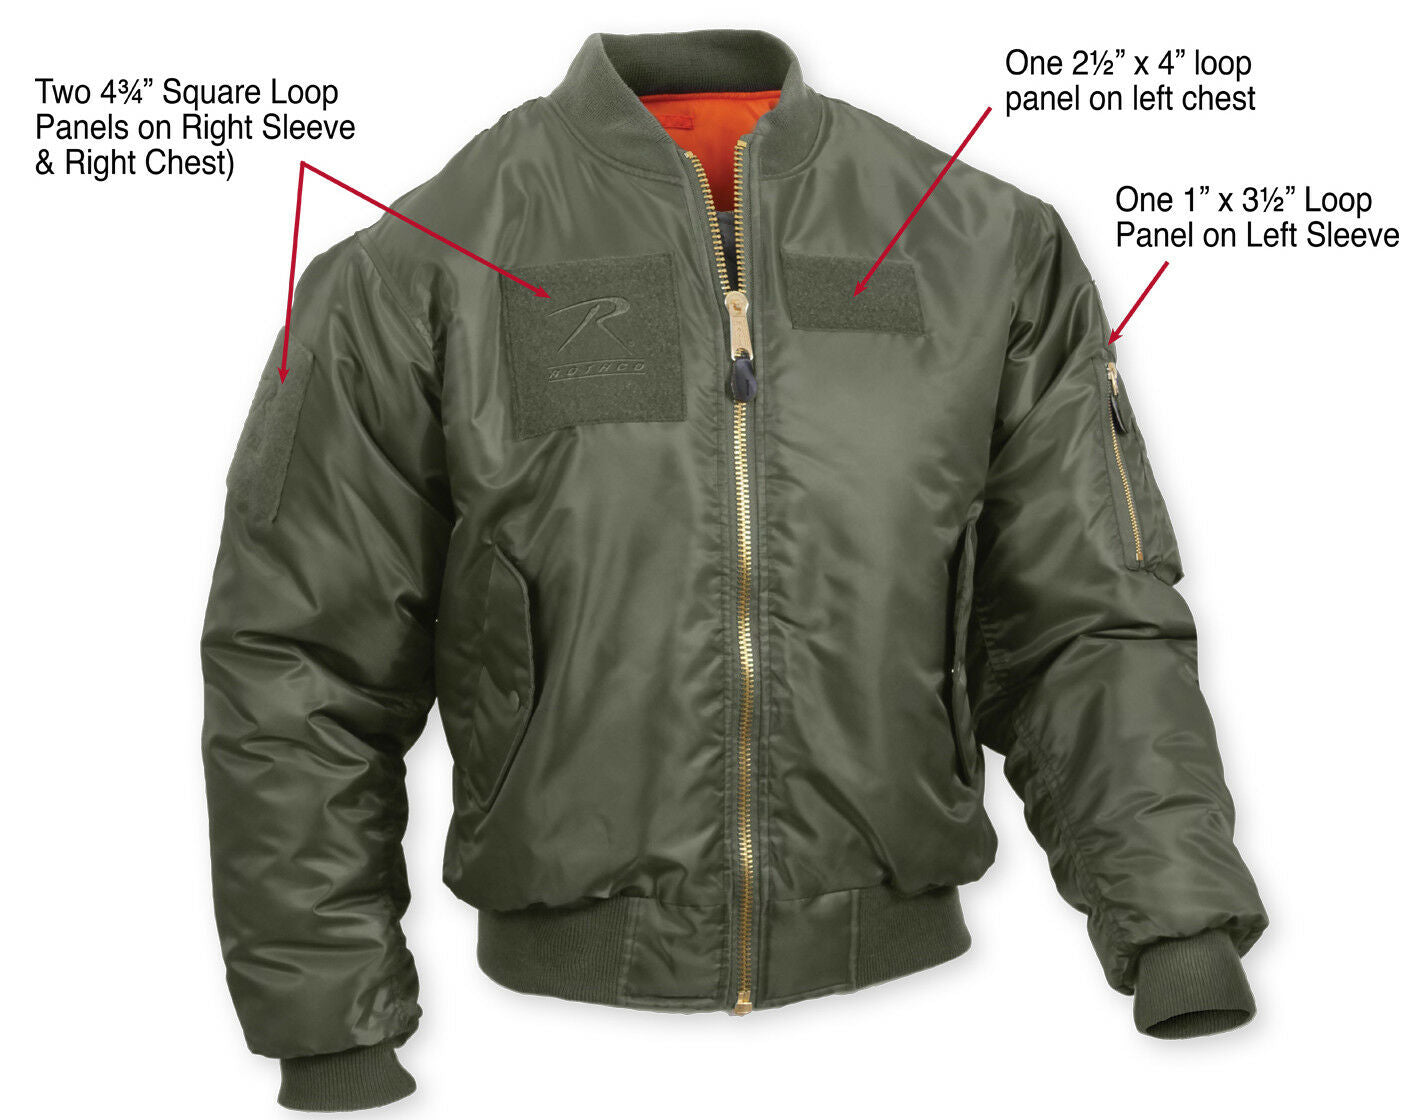 Rothco MA-1 Flight Jacket with Patches - Sage Green